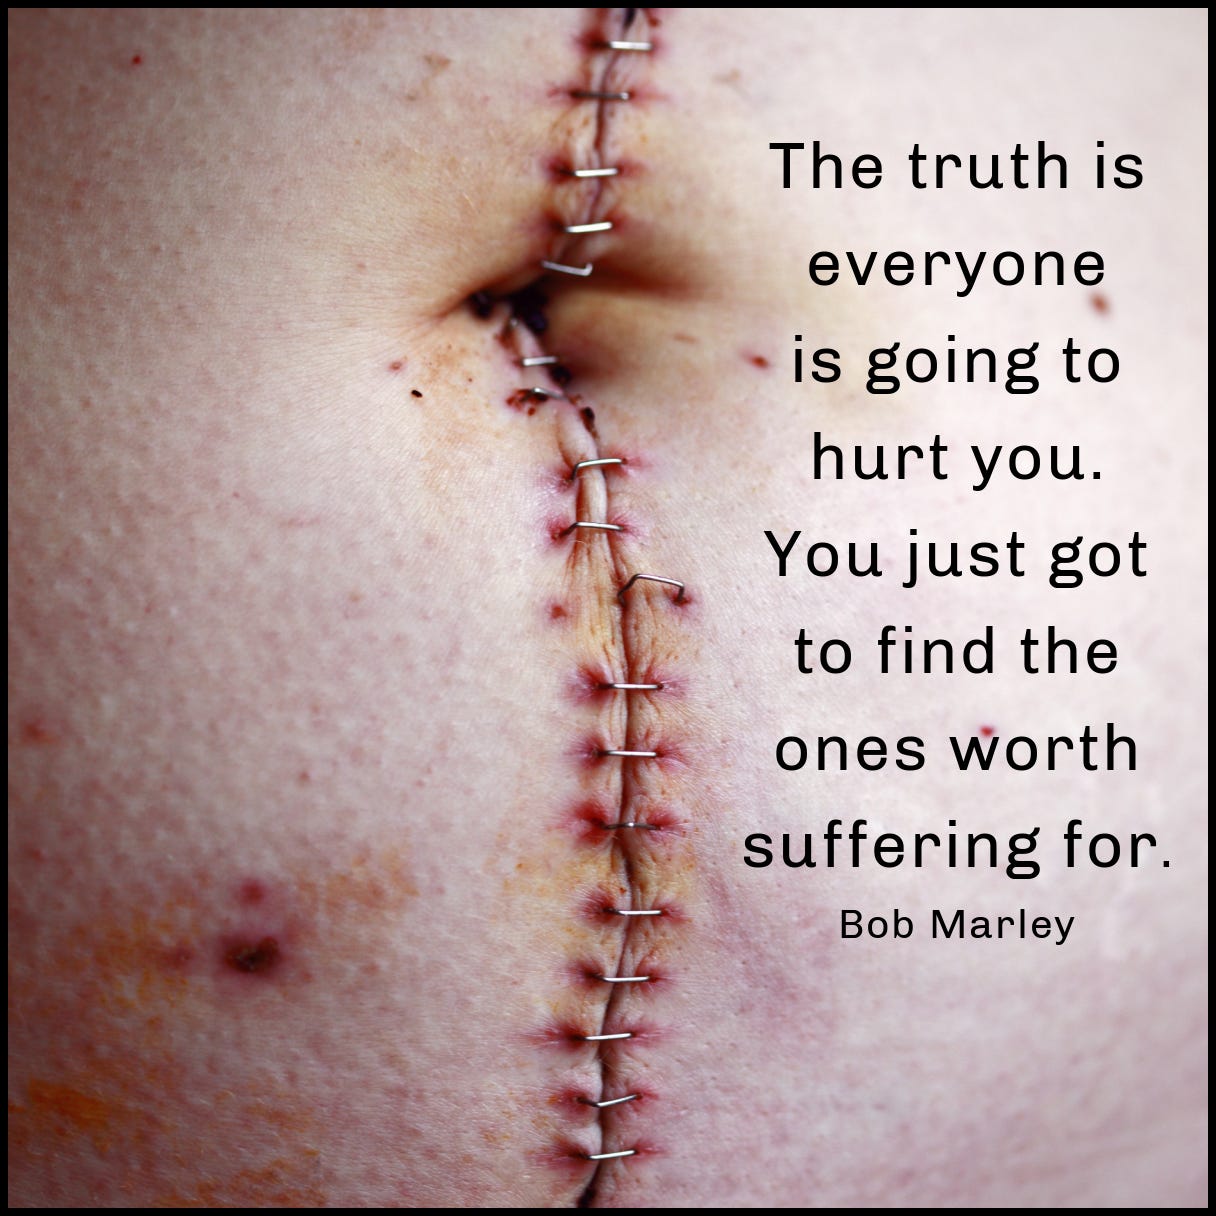 Incision closed with staples & Bob Marley quote: The truth is everyone is going to hurt you. You just got to find the ones worth suffering for.